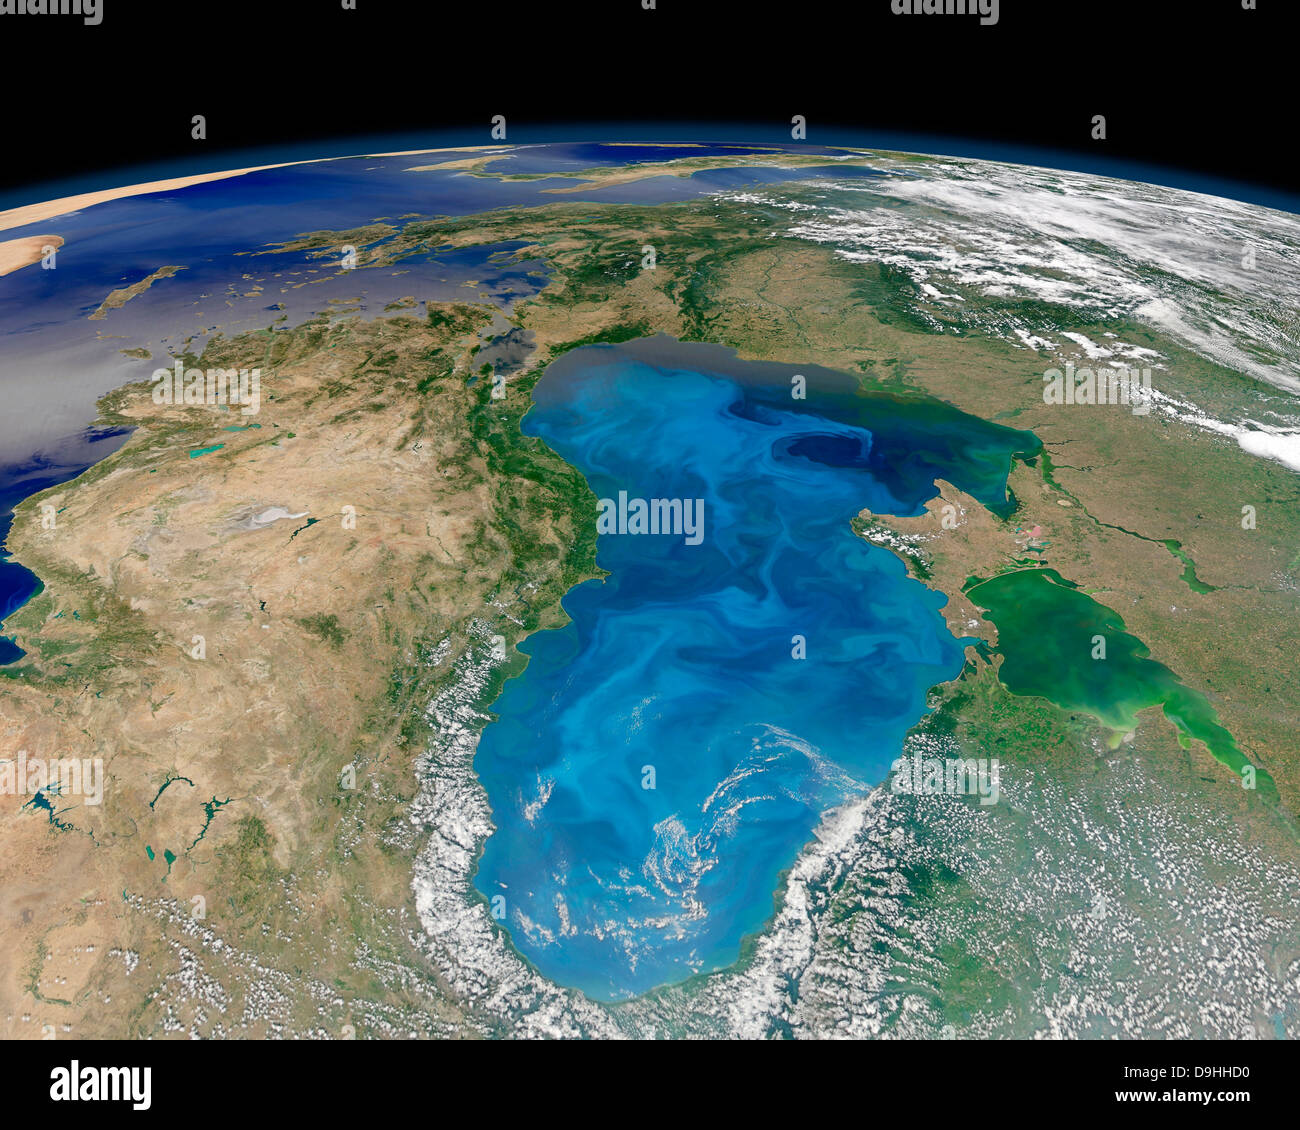 Satellite view of swirling blue phytoplankton bloom in the Black Sea. Stock Photo